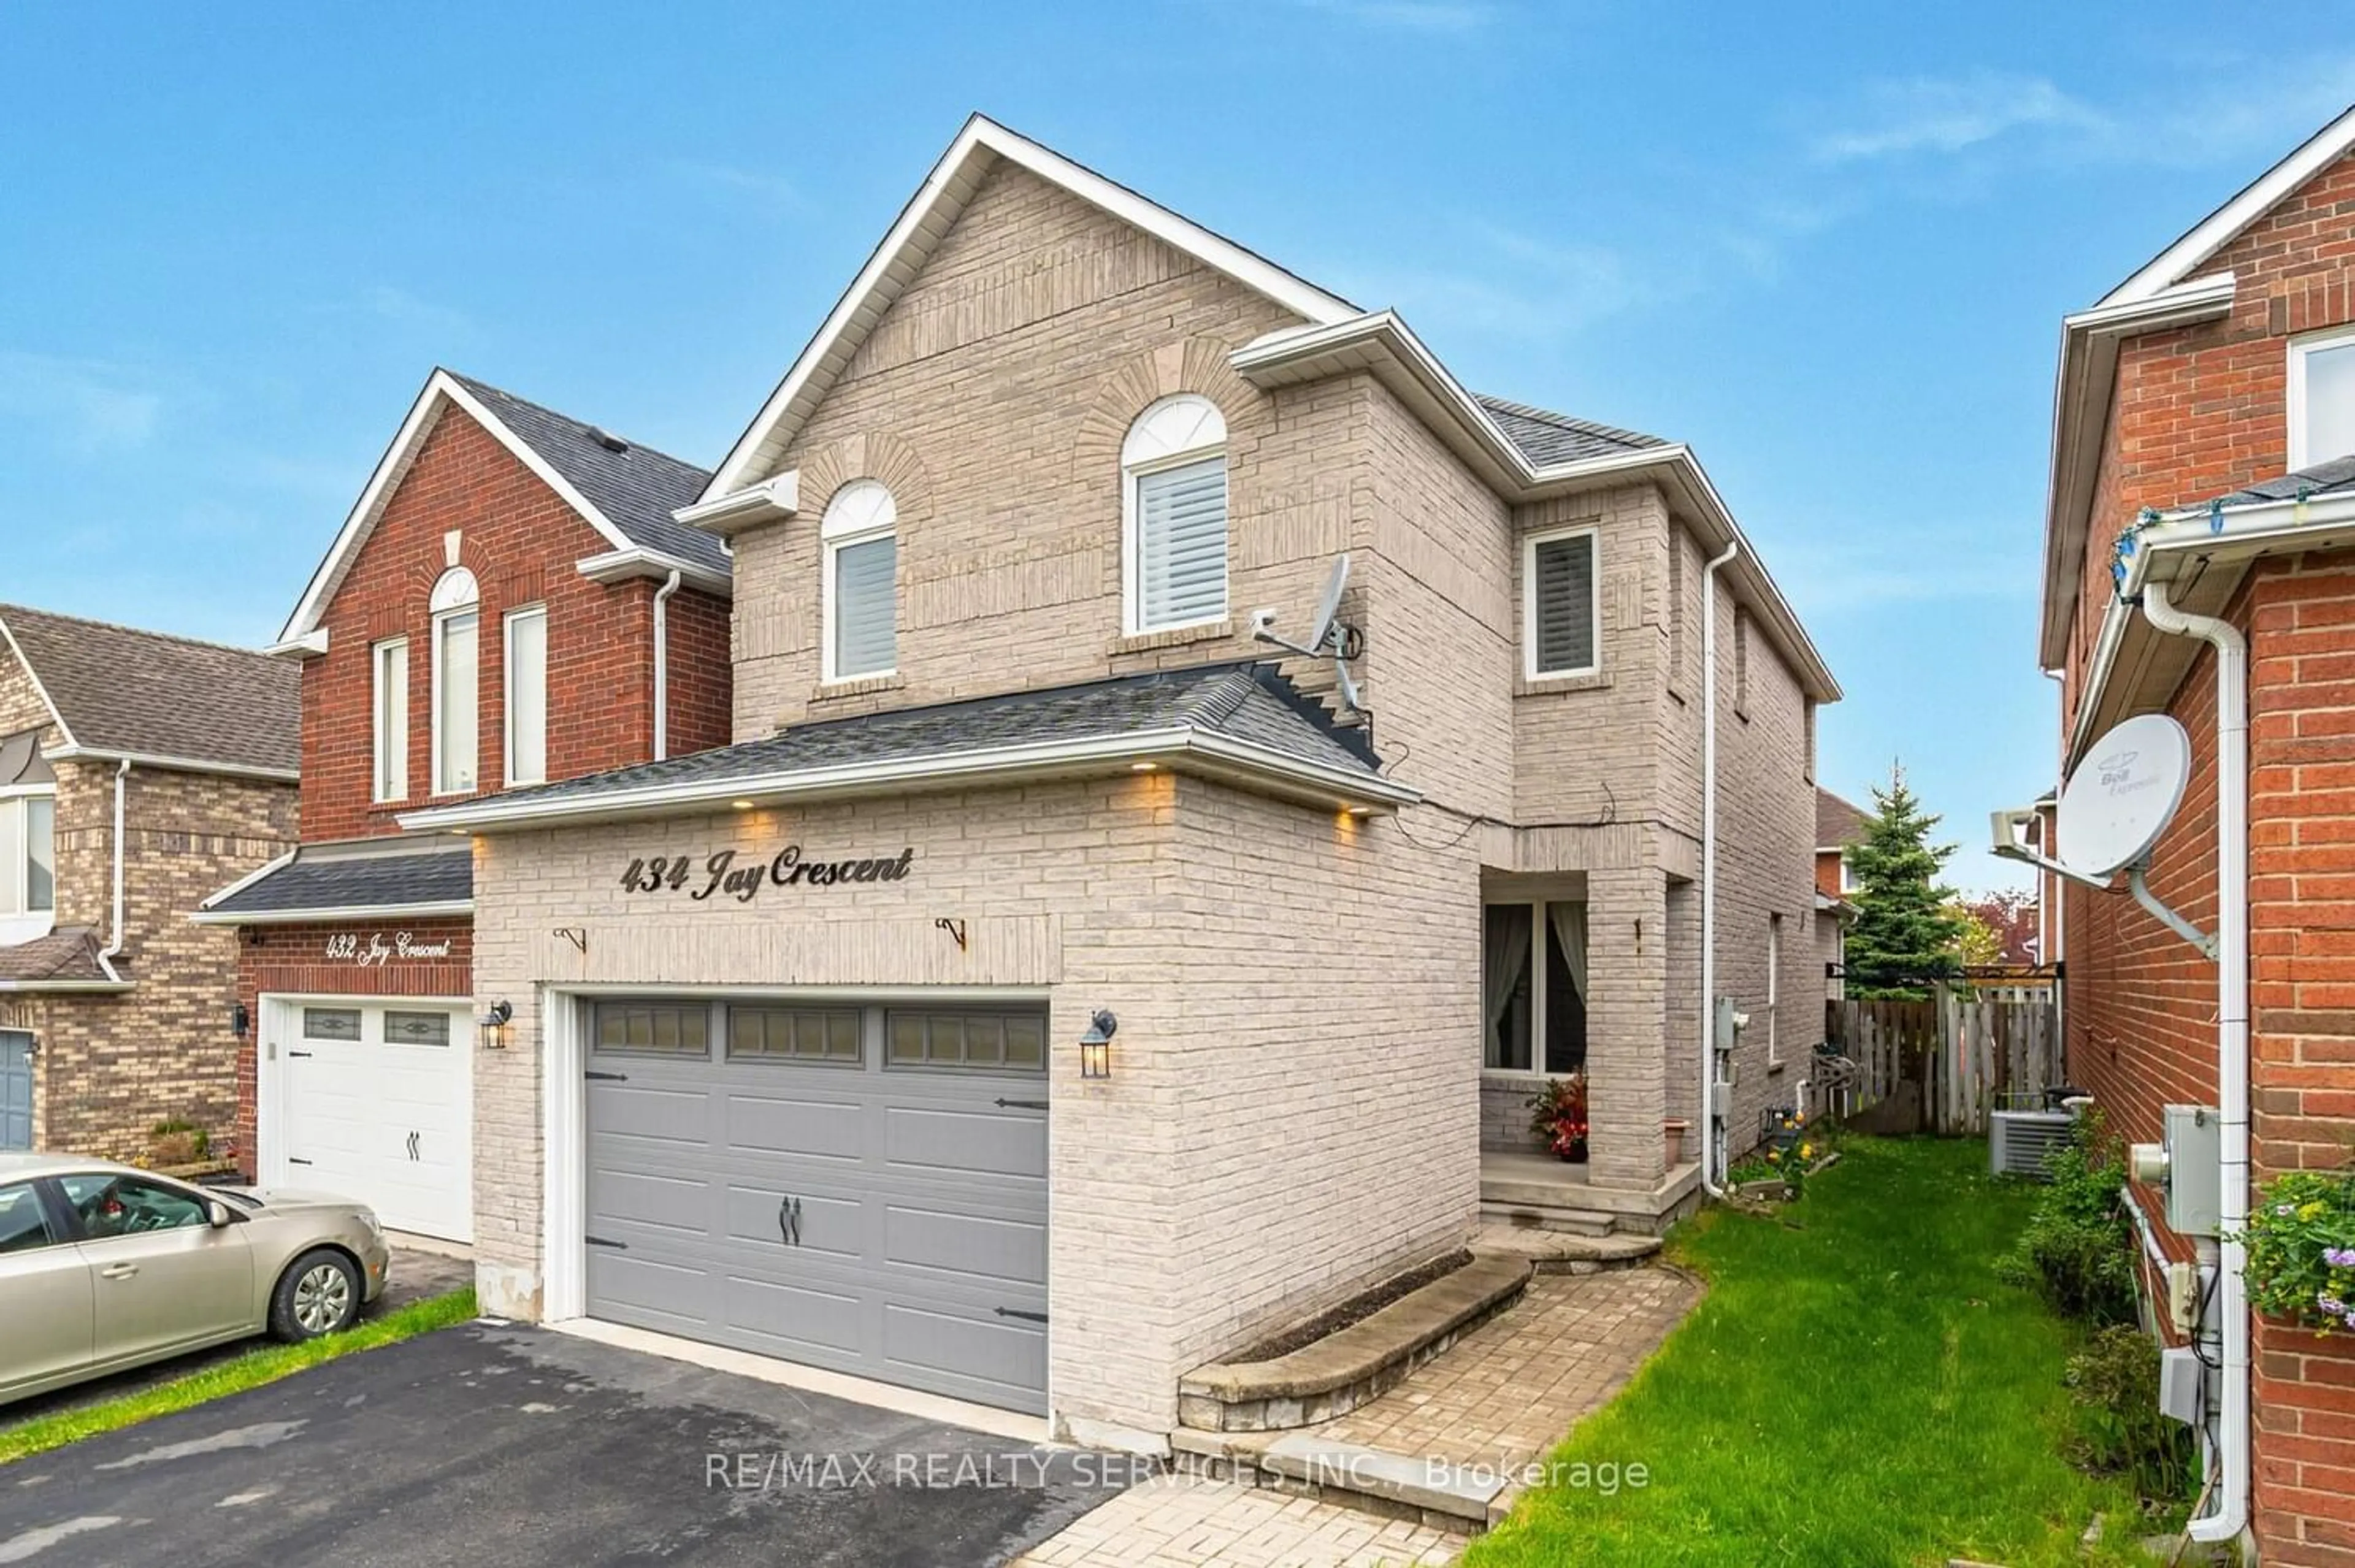 Home with brick exterior material for 434 Jay Cres, Orangeville Ontario L9W 4Z2